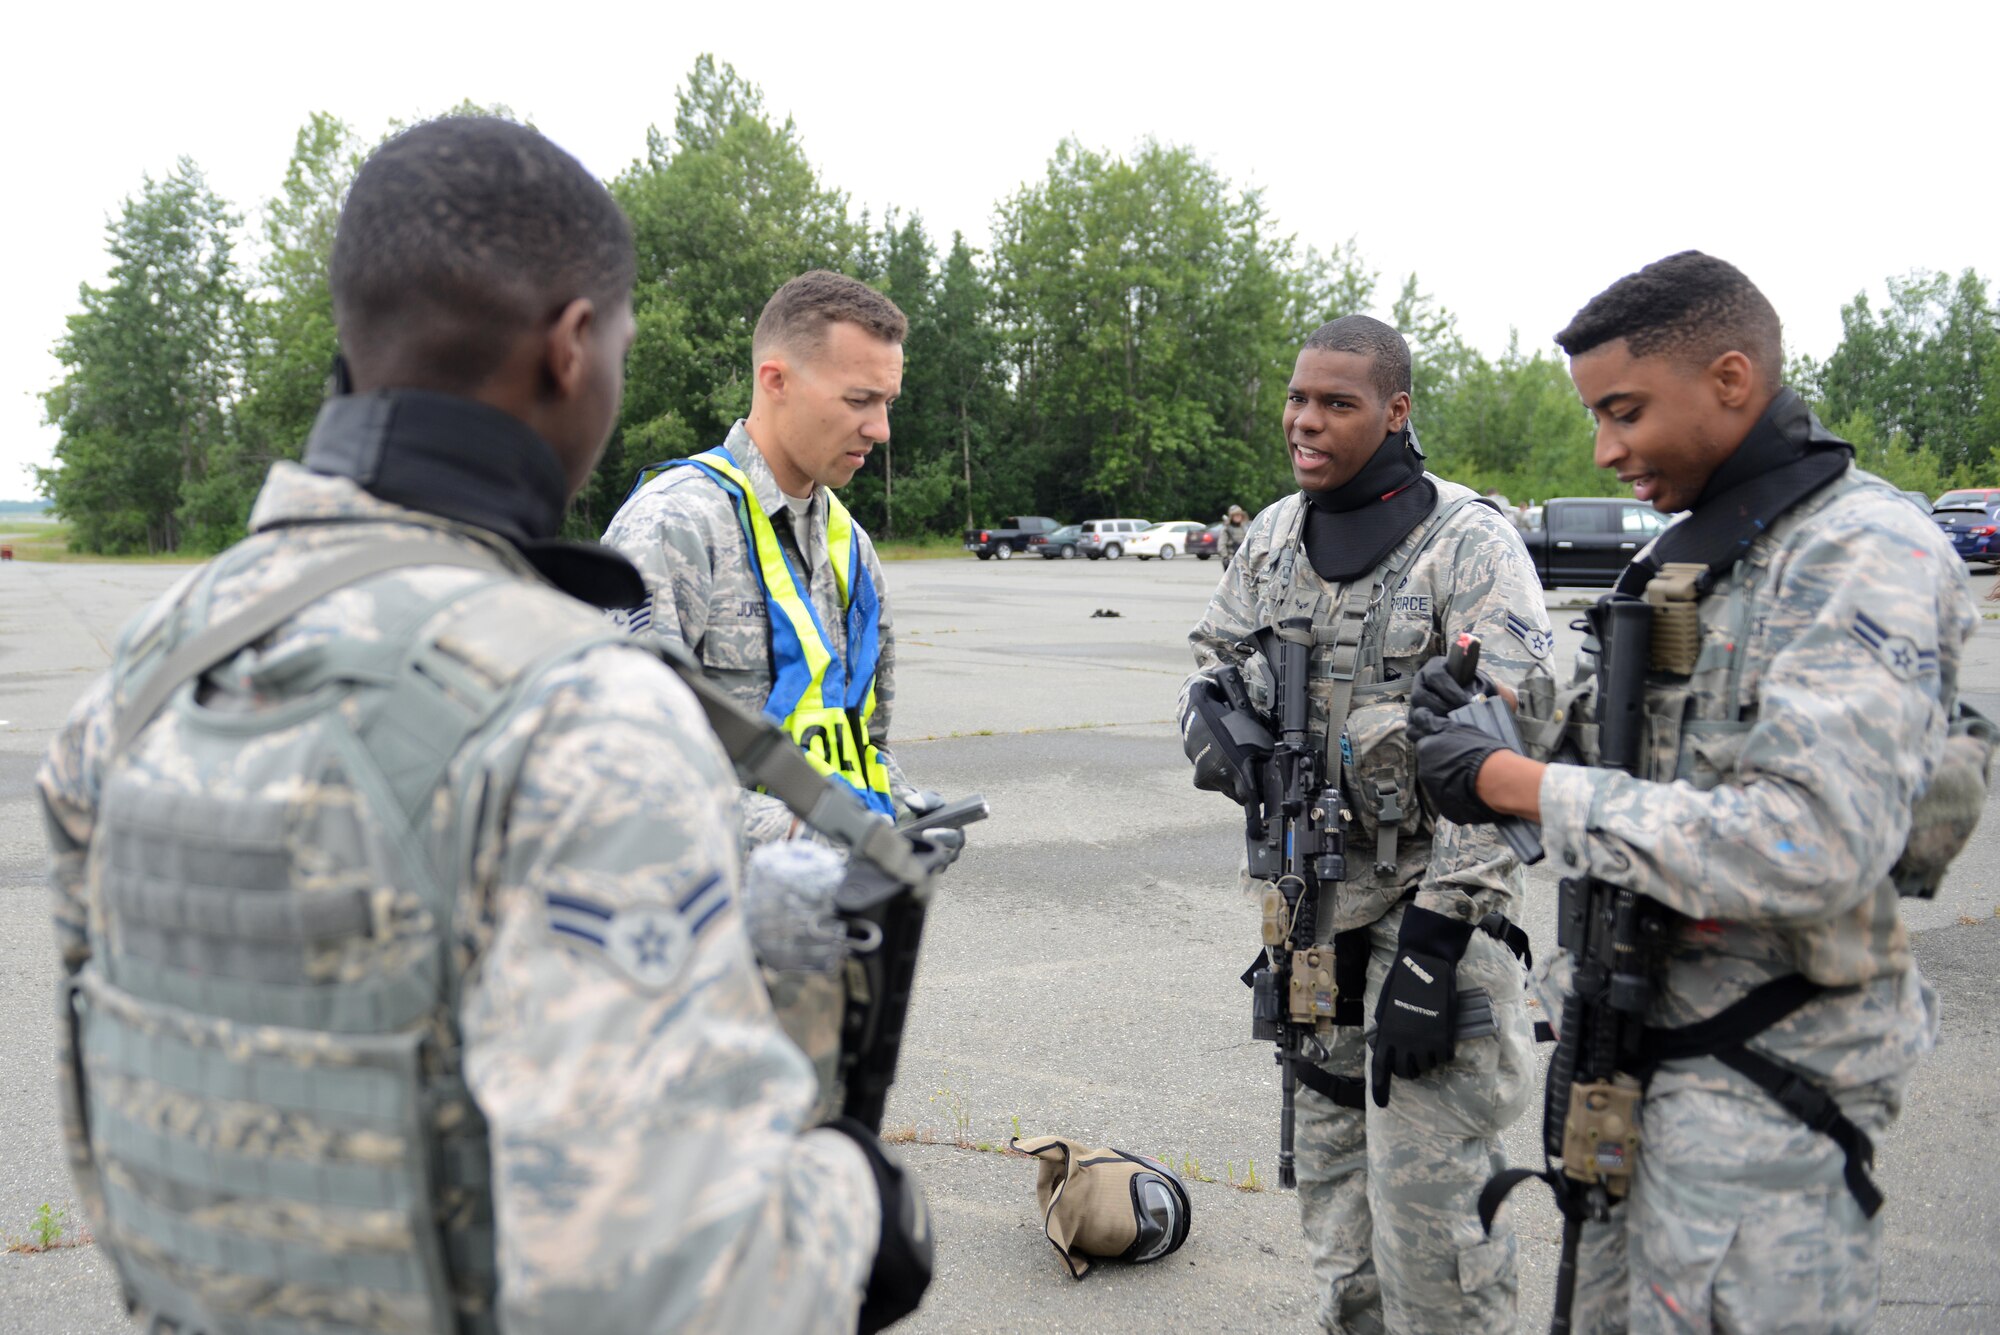 A team of 673d Security Forces Squadron members discuss their actions and responses after going through an active-shooter training scenario at Joint Base Elmendorf-Richardson, Alaska, July 18, 2017. Security forces trained in high-stress environments with hostages and aggressive perpetrators, so they learned how to appropriately respond and handle various hostile situations. 